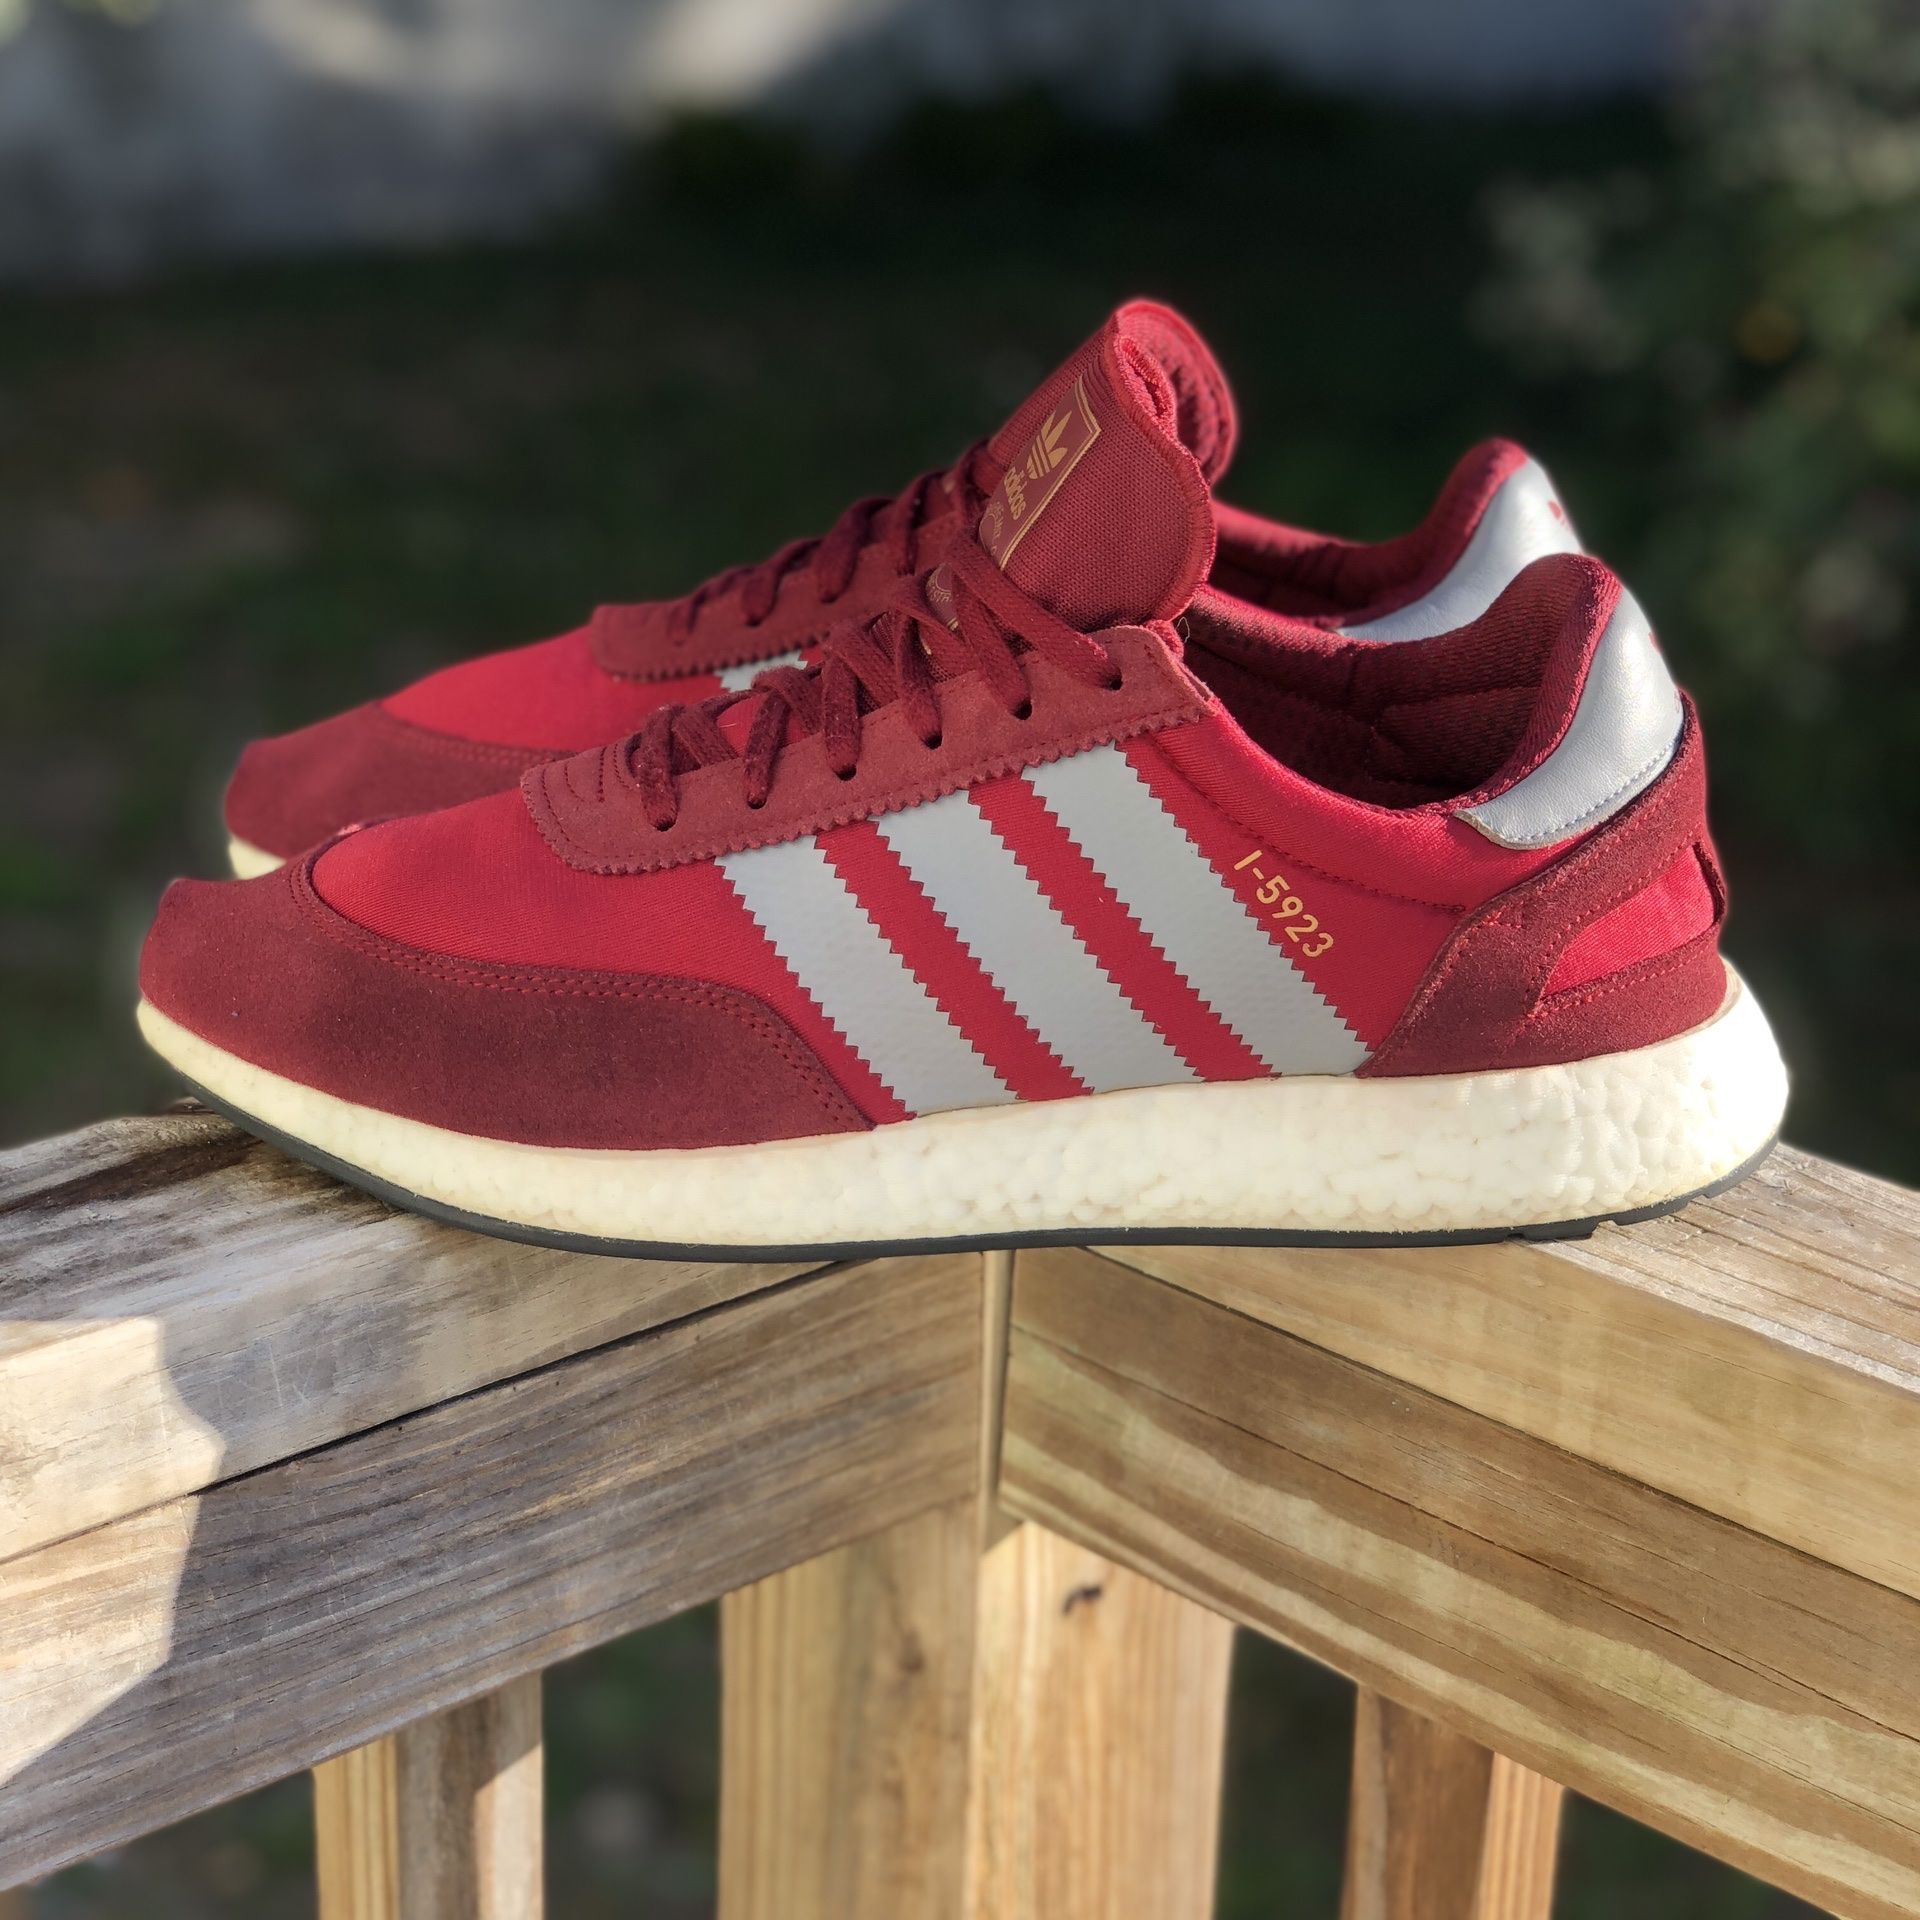 Adidas I-5923 Burgundy - Shoes b27871 Mens 14 for Sale in Lutz, FL - OfferUp